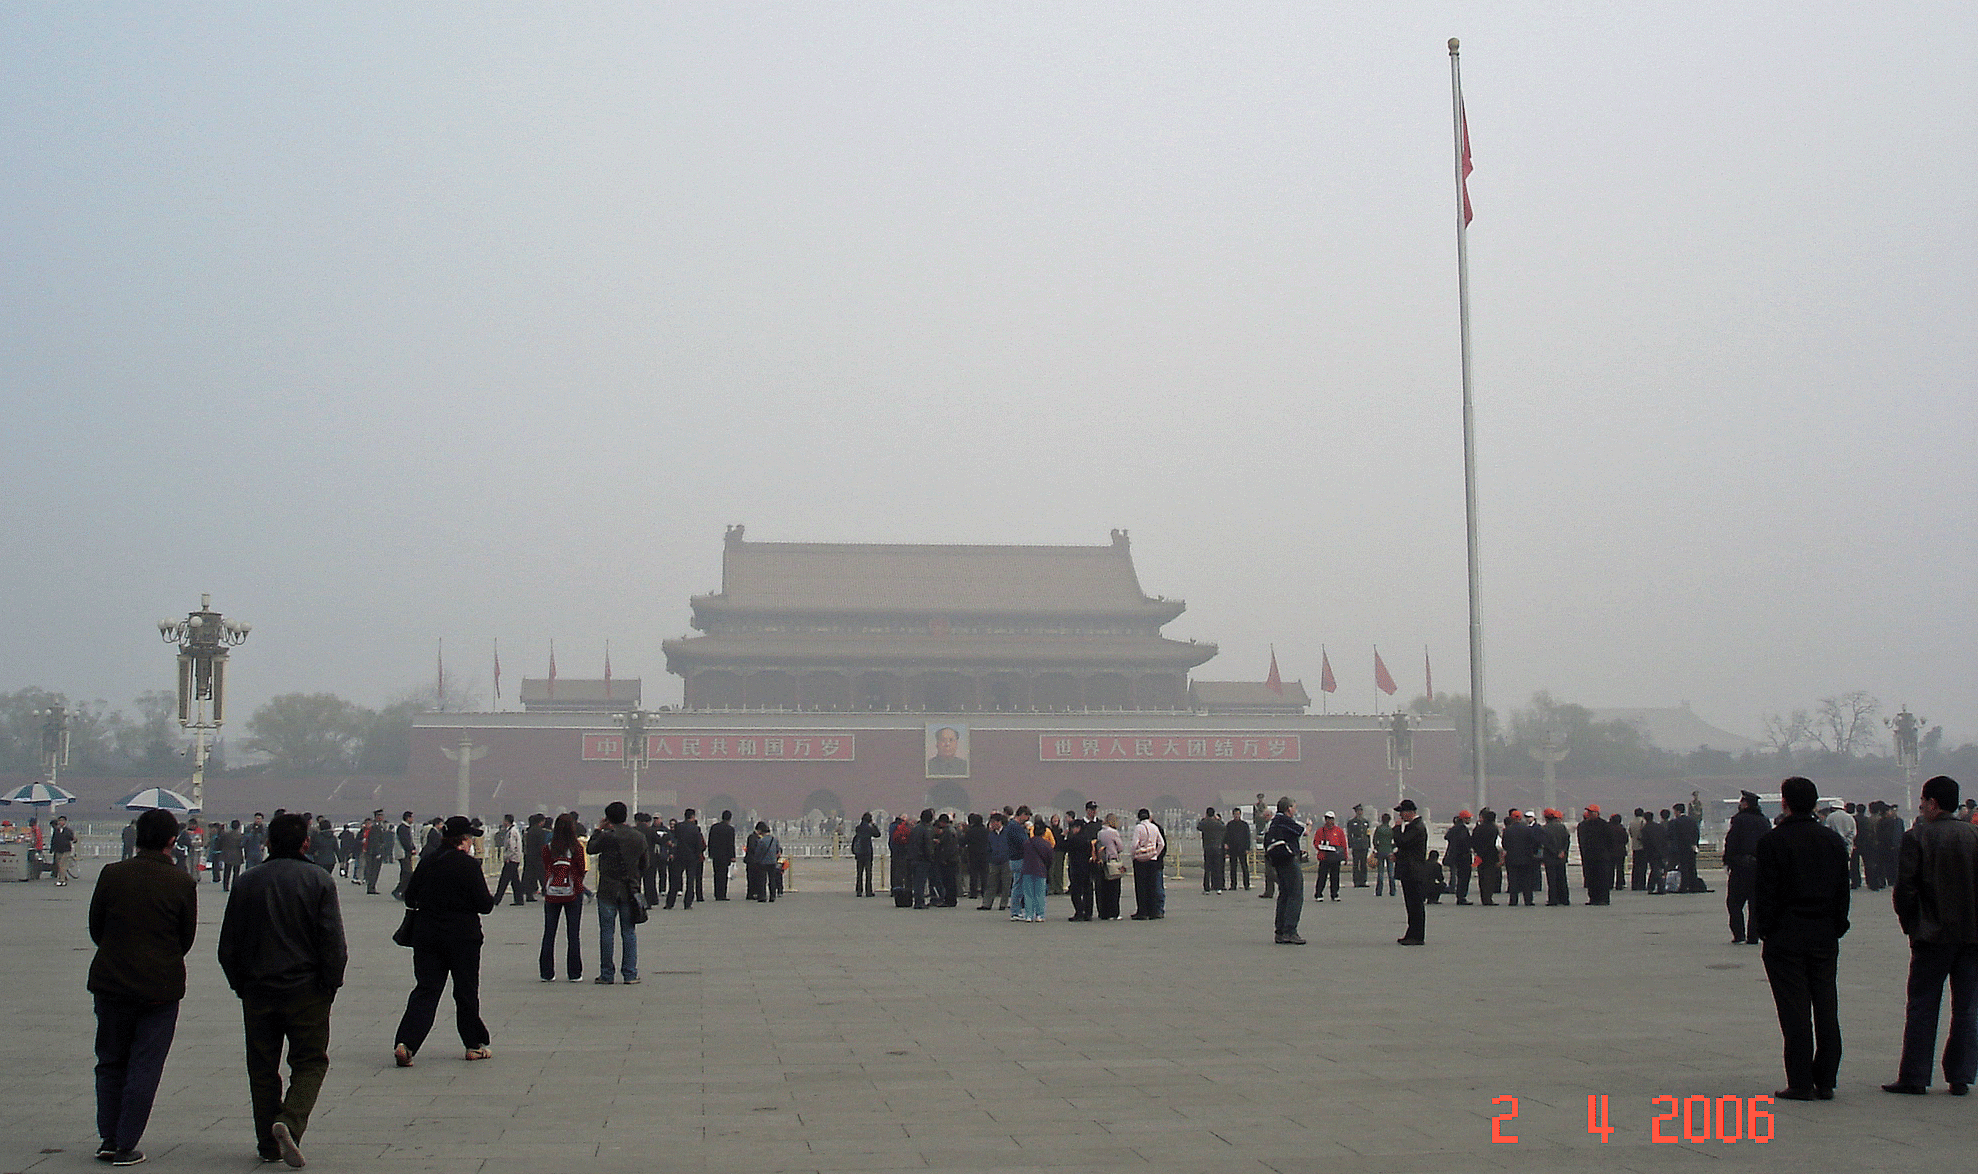 Tiananmen Square&Gate of Heavenly peace thru the early morning fog.